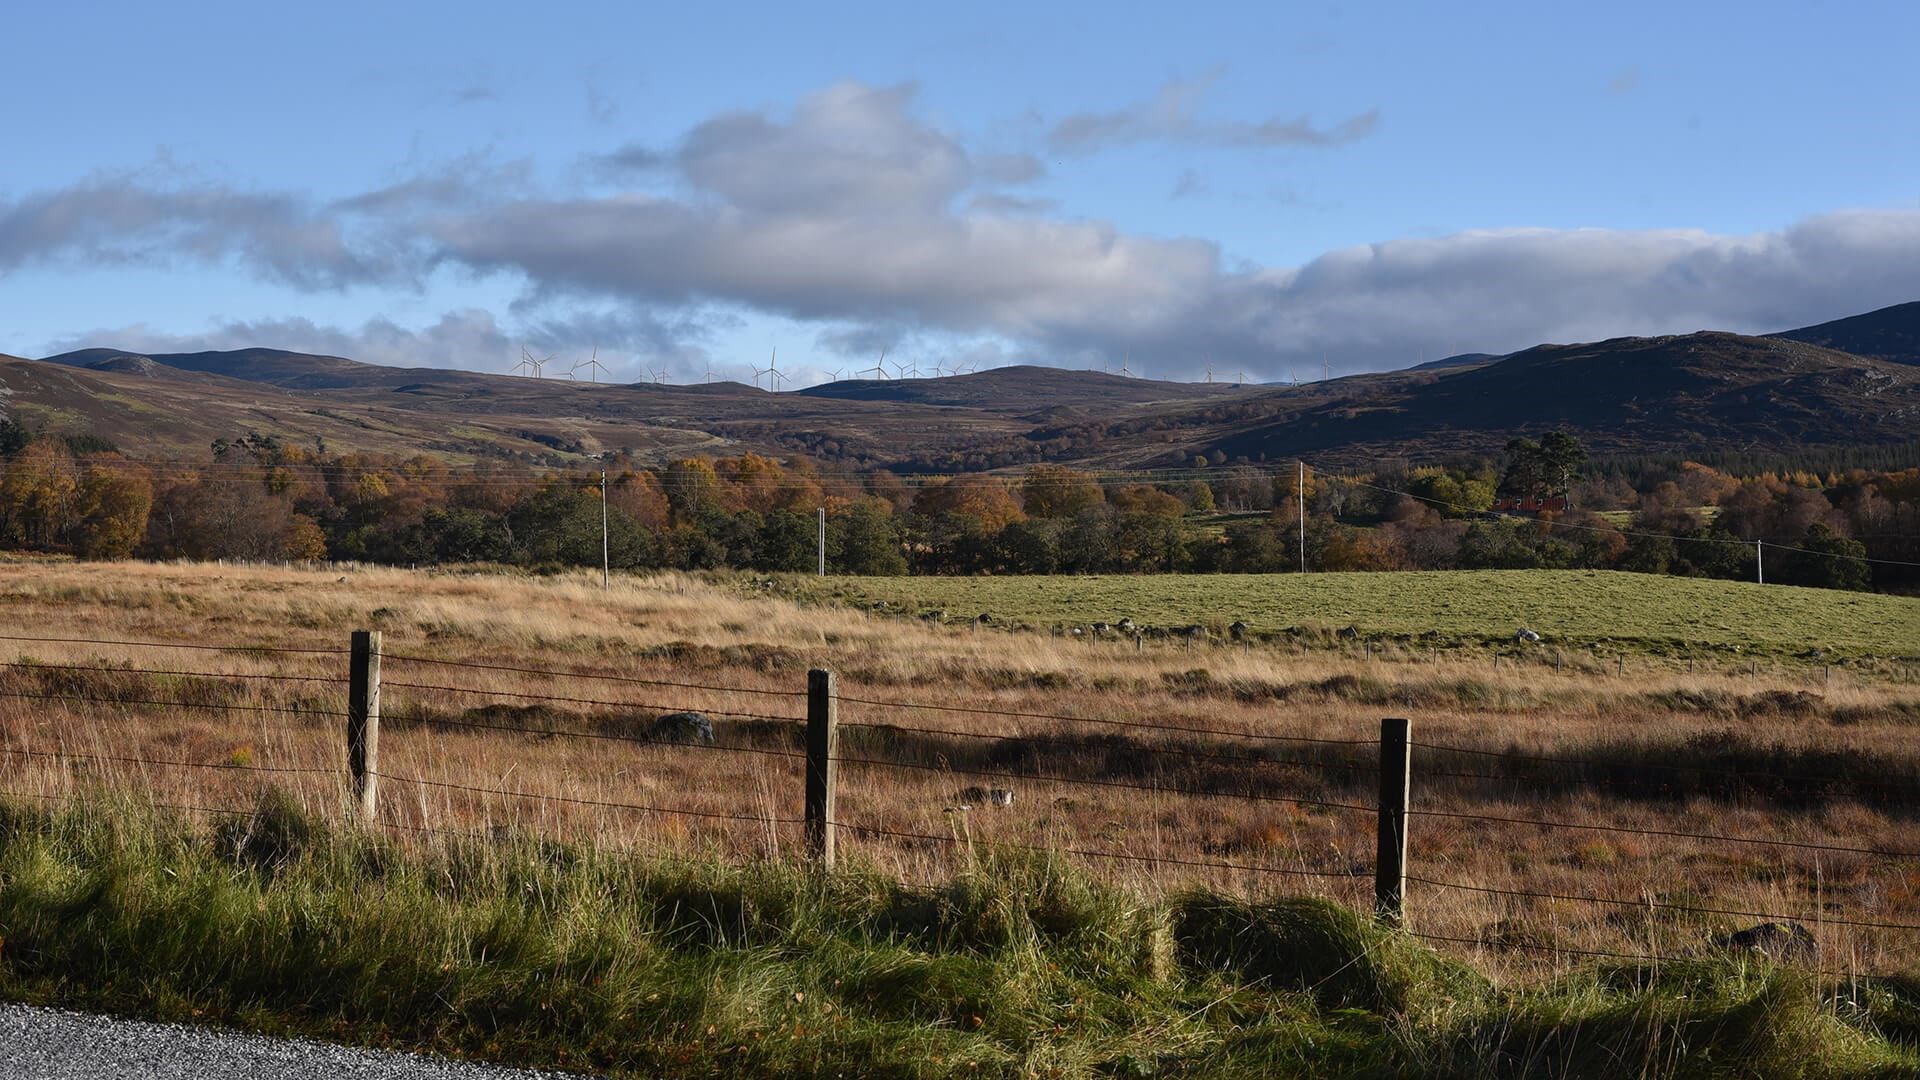 The wind farm site from the B862 west of Corriegarth Lodge.